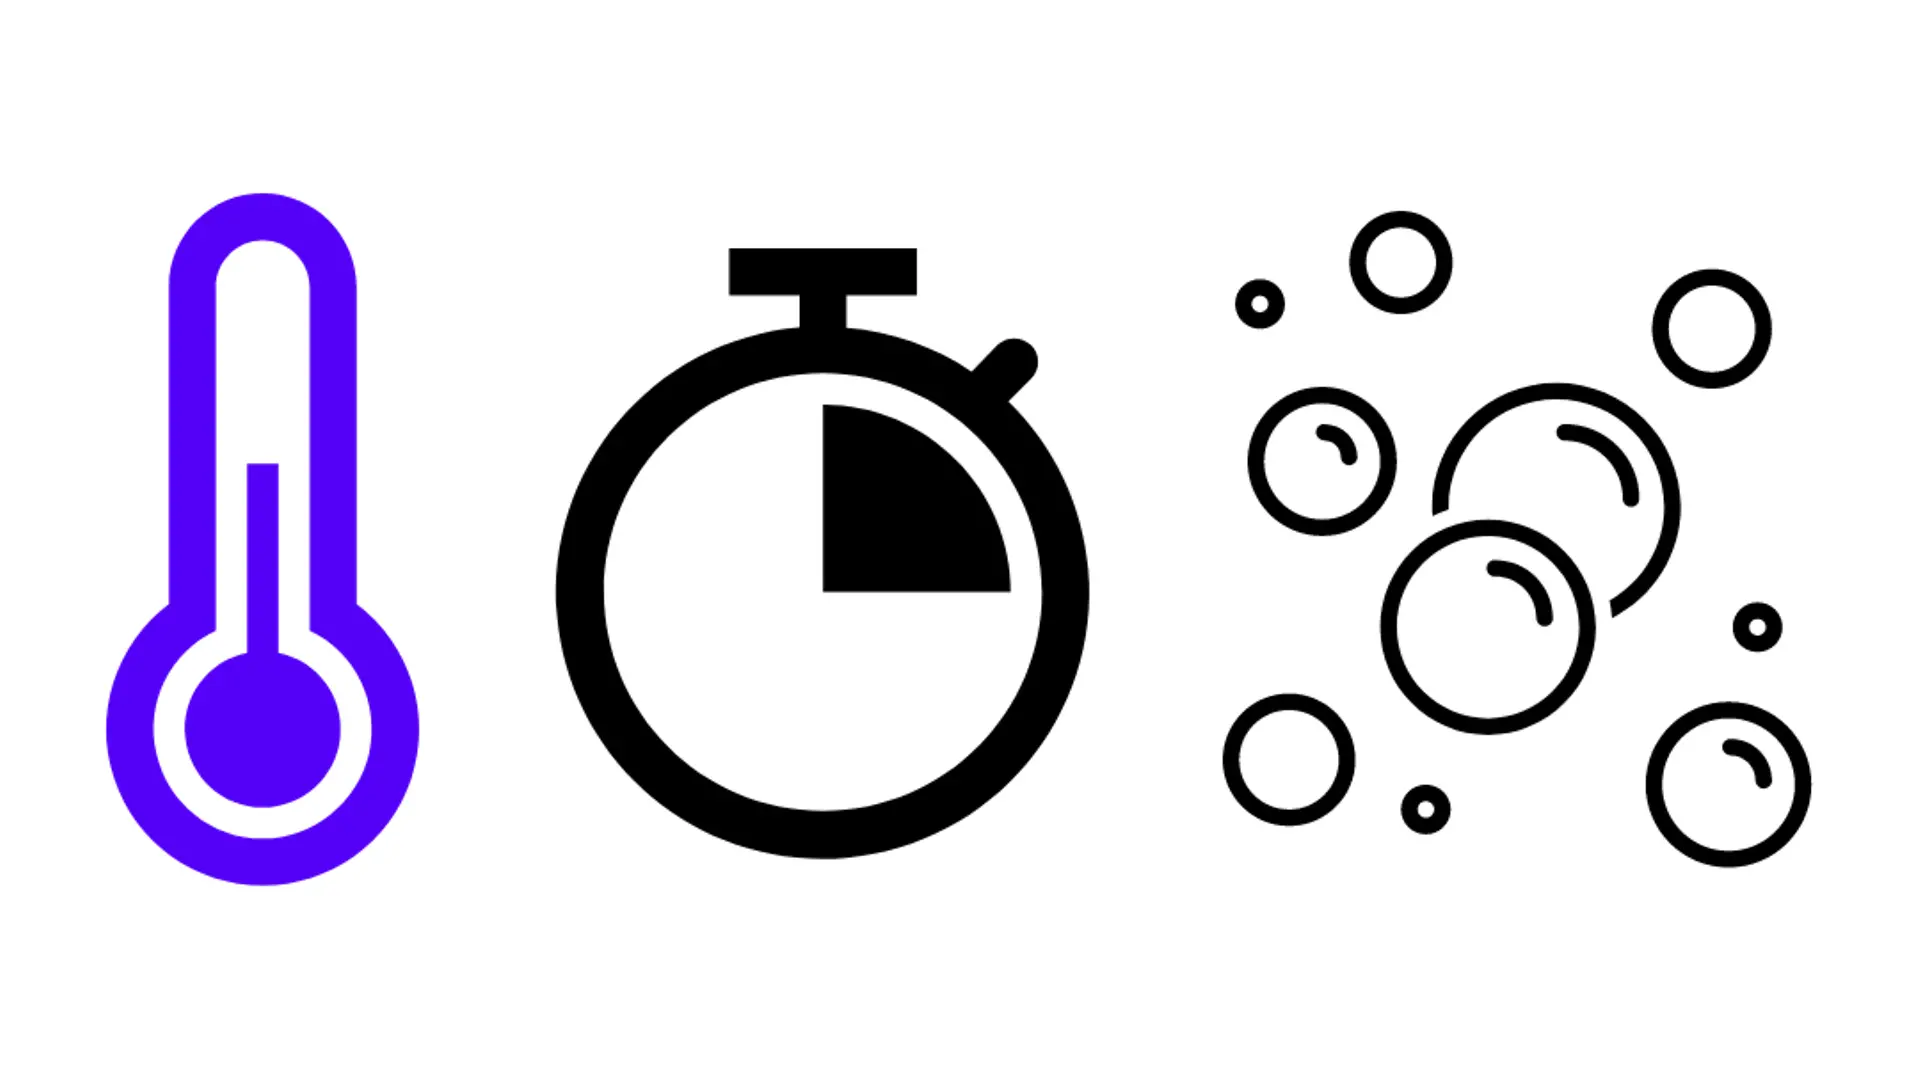 blue symbol for thermometer, clock symbol, quater of an hour, and symbol for foam